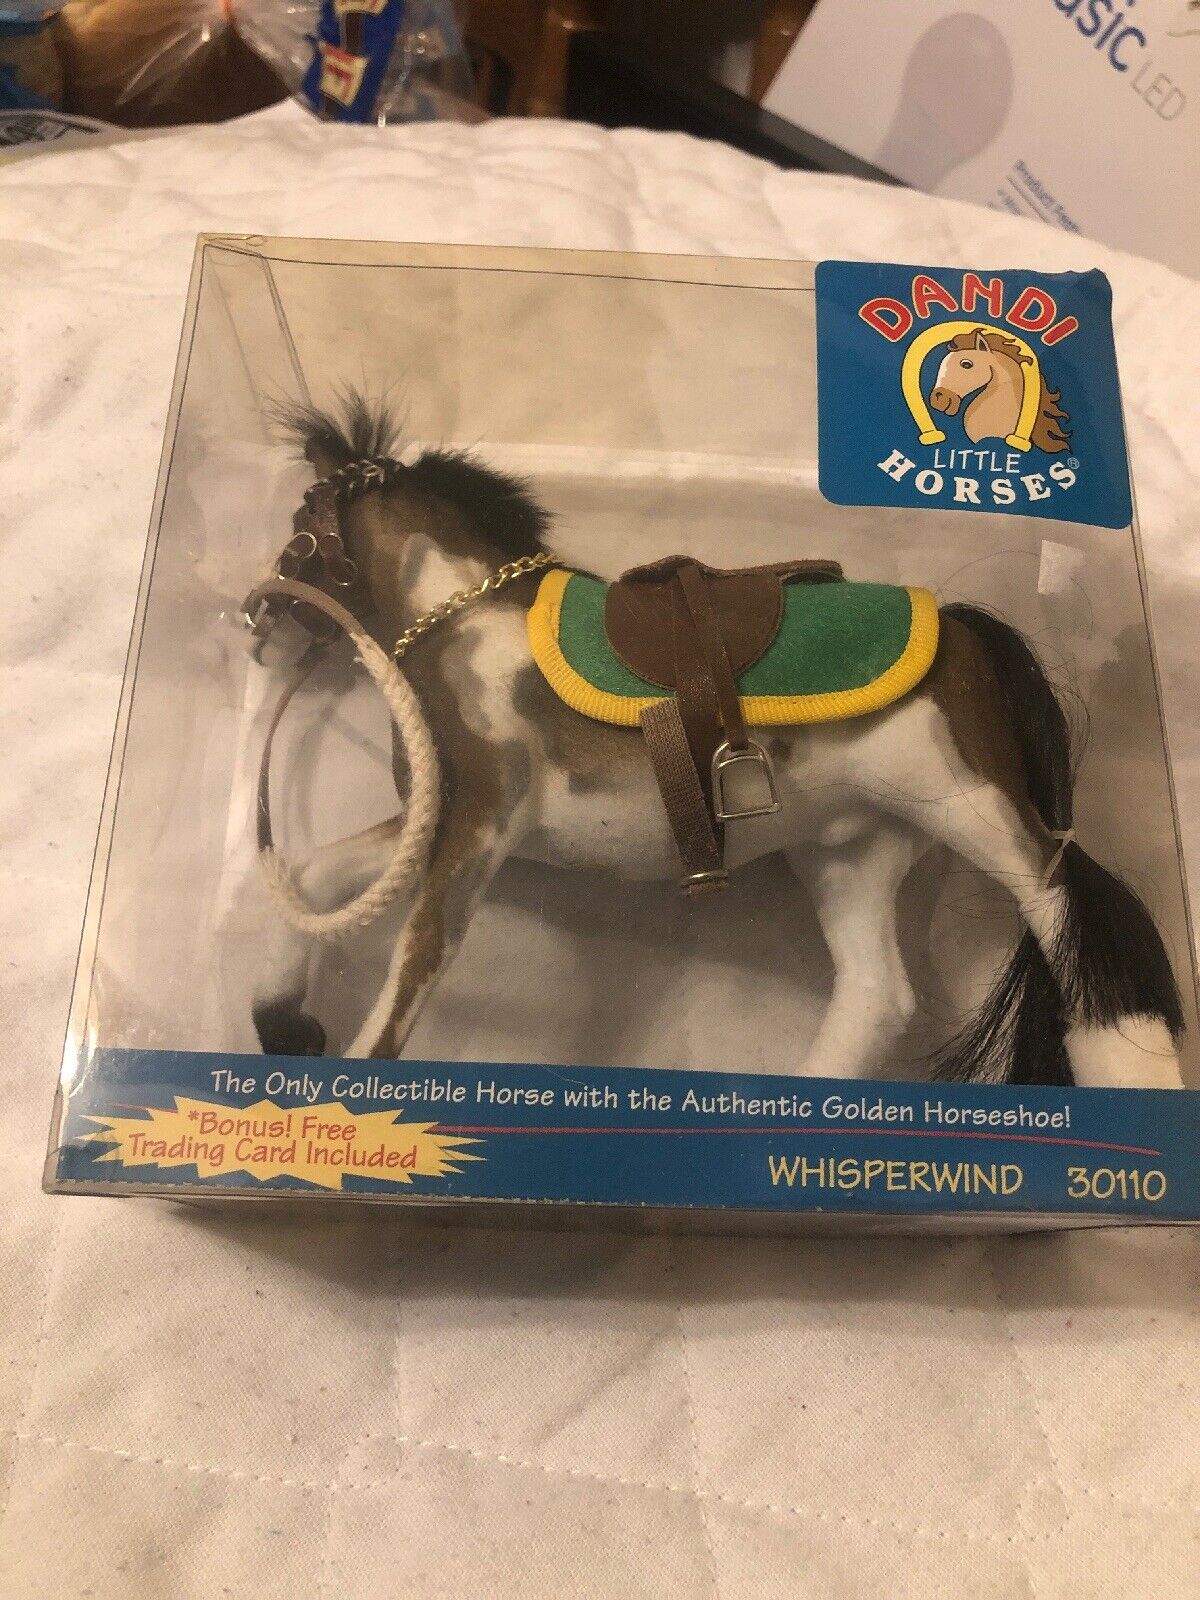 Dandi Little Horse Collectible Whisperwind 30110 Rare Factory Sealed